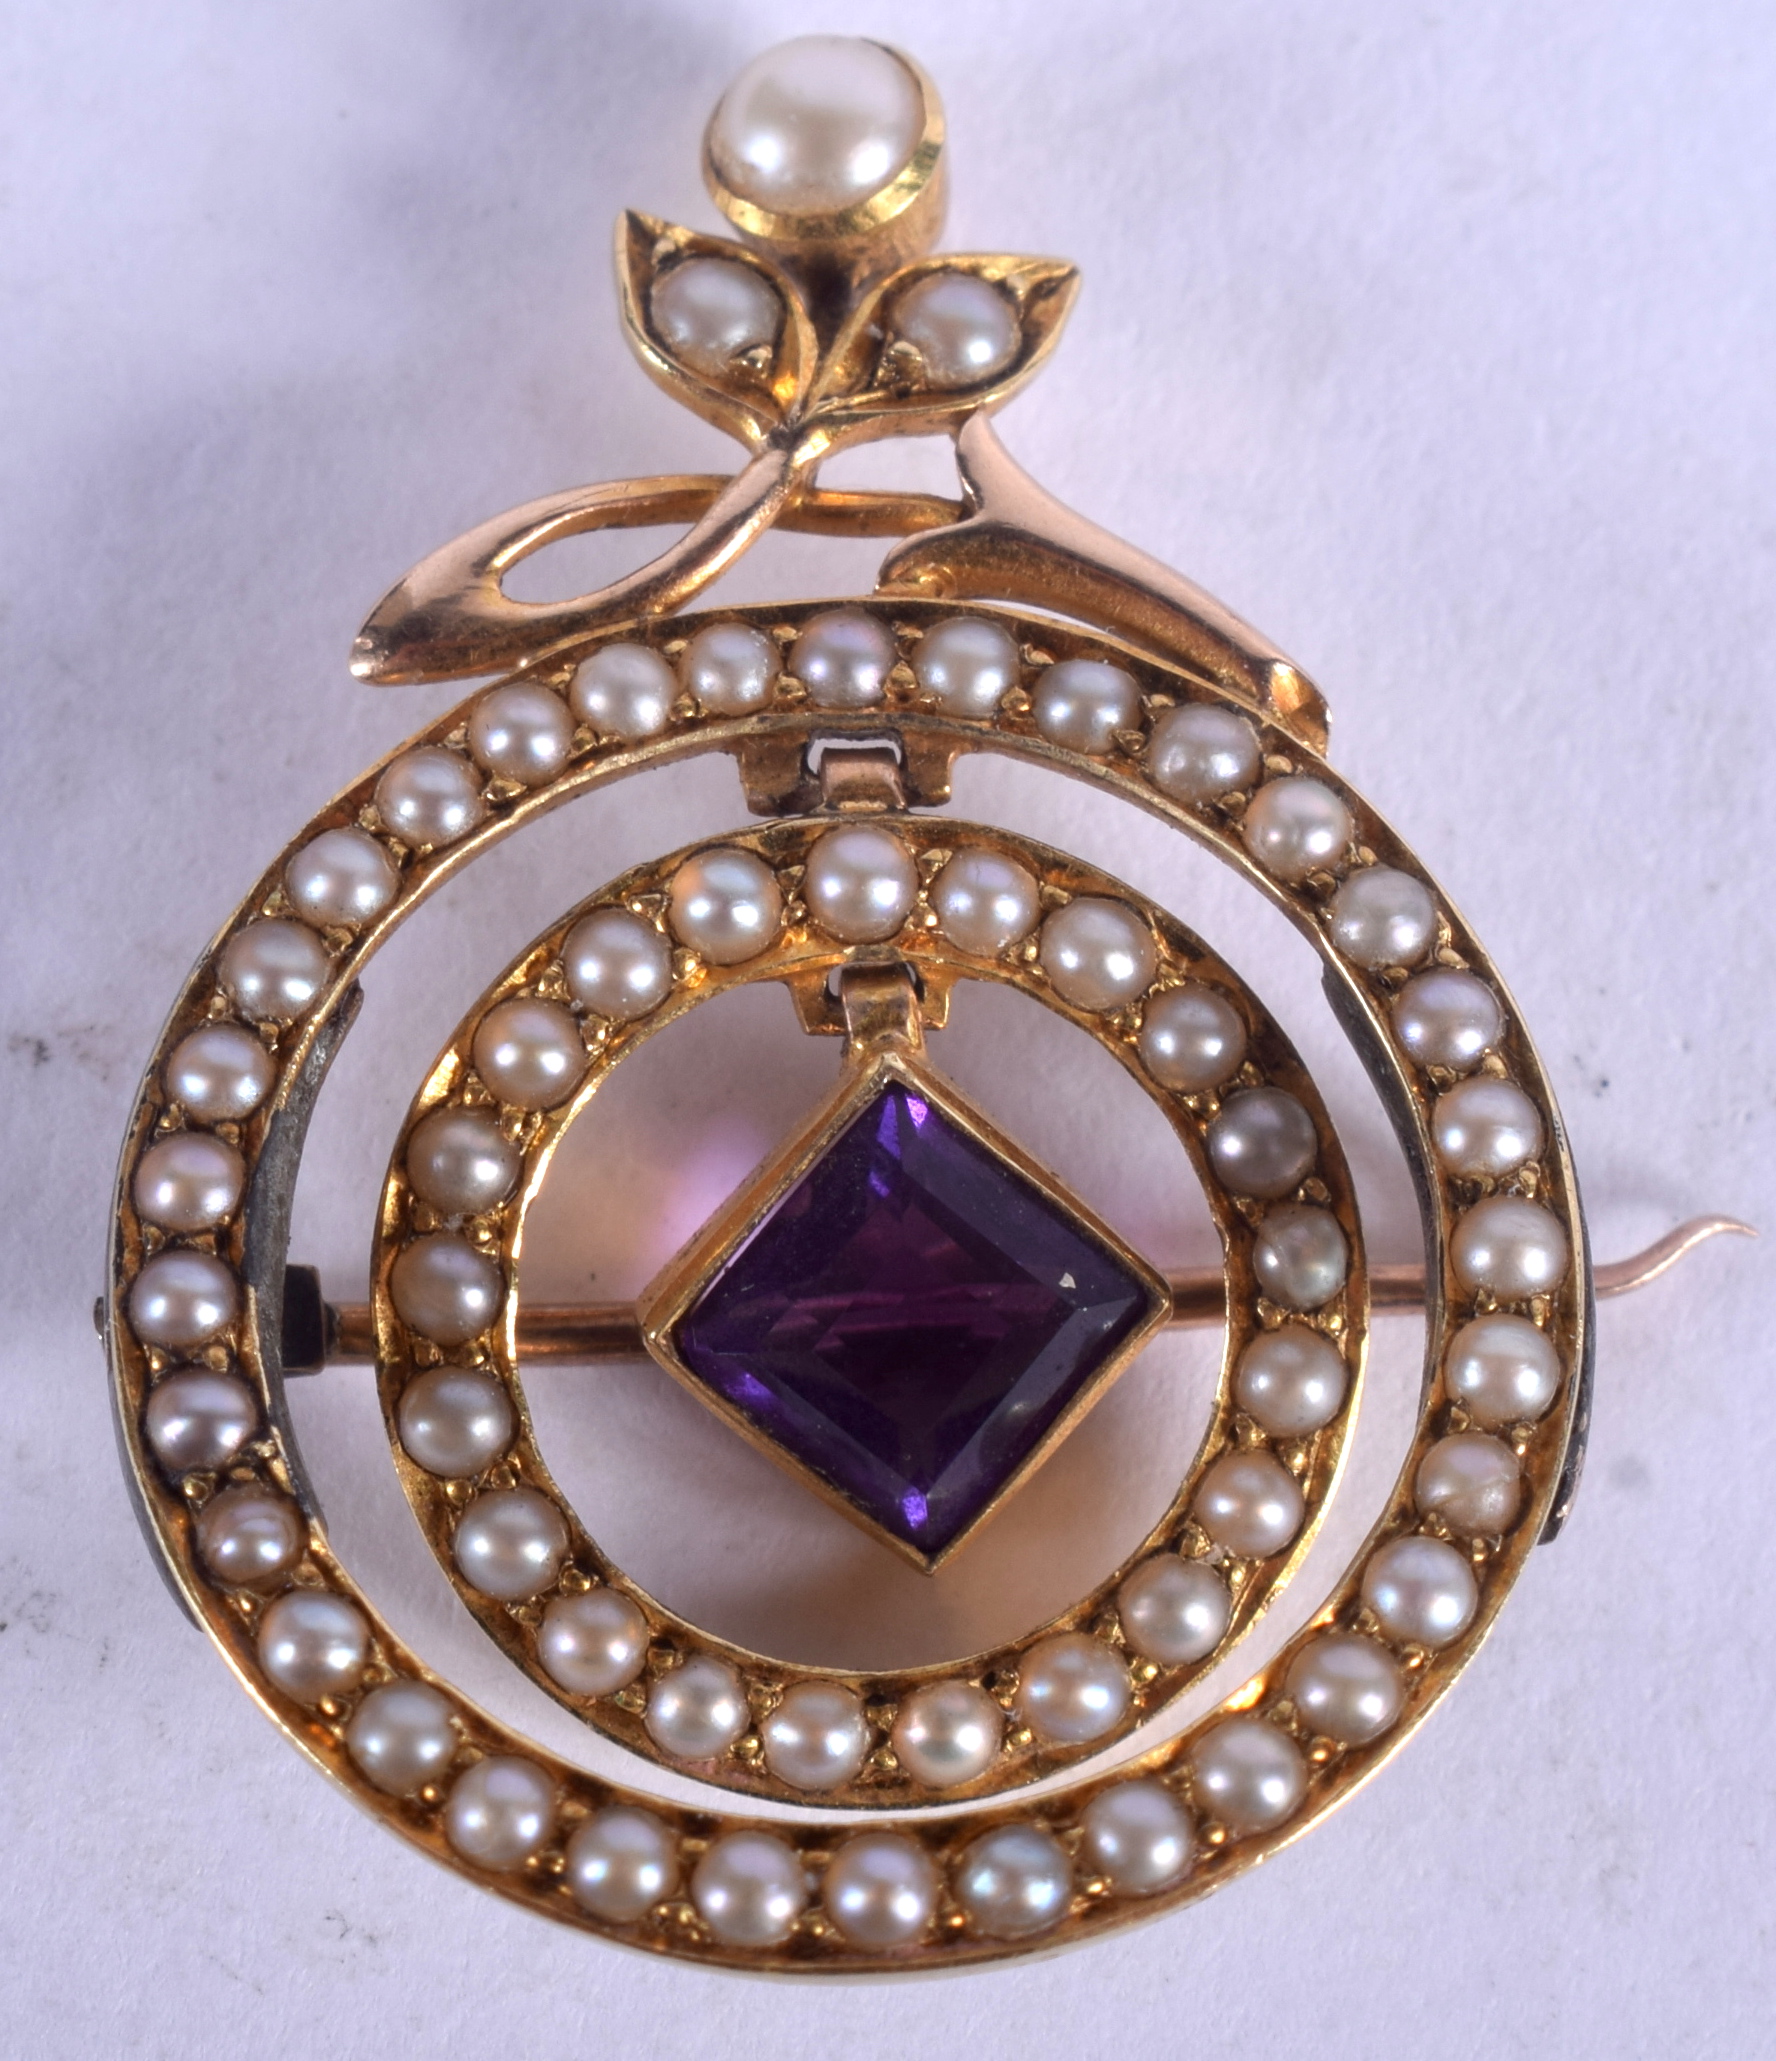 AN EDWARDIAN NEO CLASSICAL PEARL AND AMETHYST FOB. 3.8 grams. 2 cm x 2.5 cm.